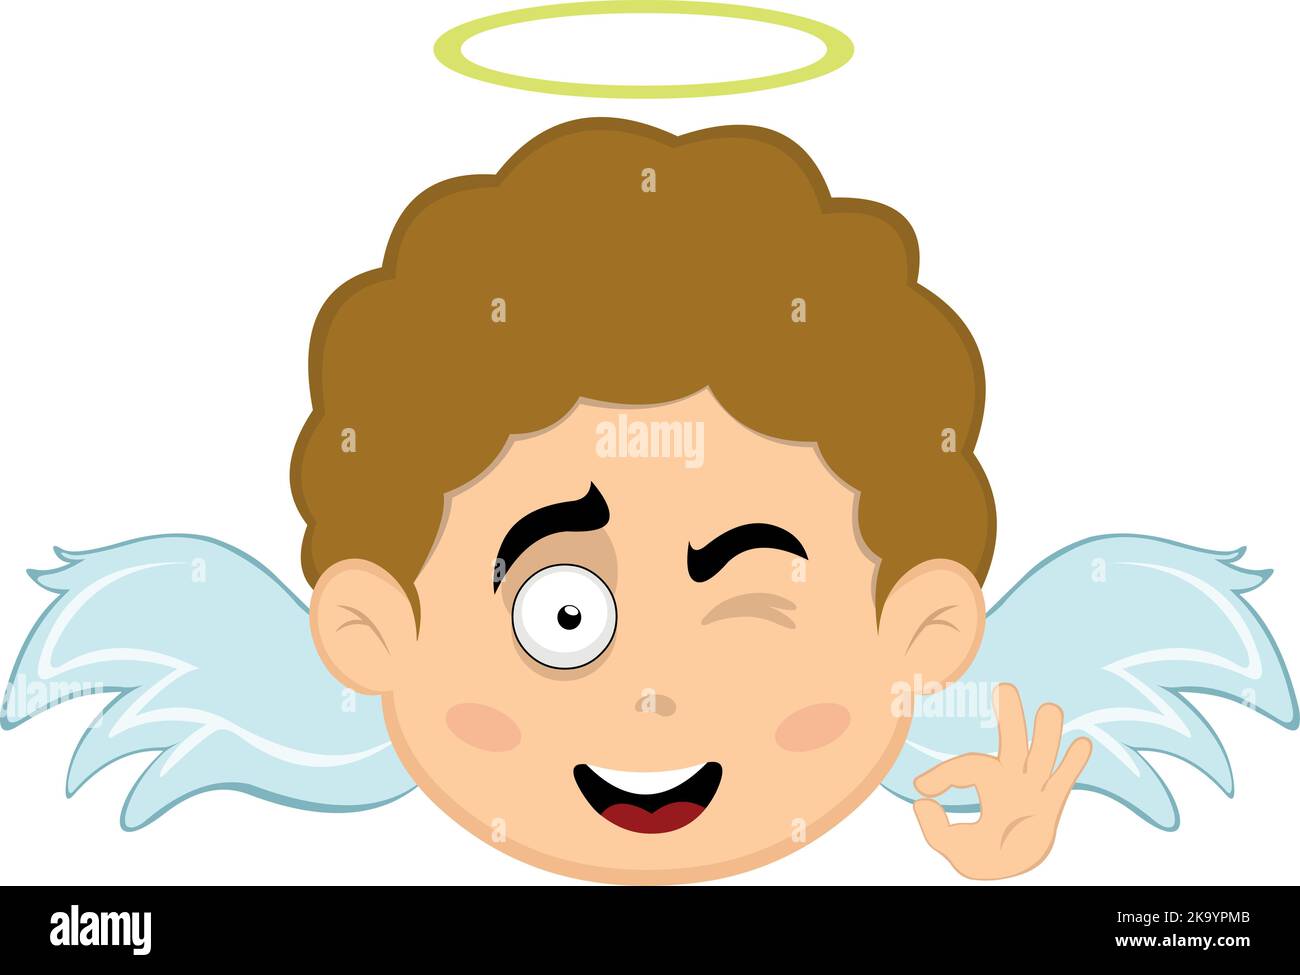 Vector illustration of the face of a cartoon angel boy with a happy expression, winking and making an ok or perfect gesture with his hand Stock Vector